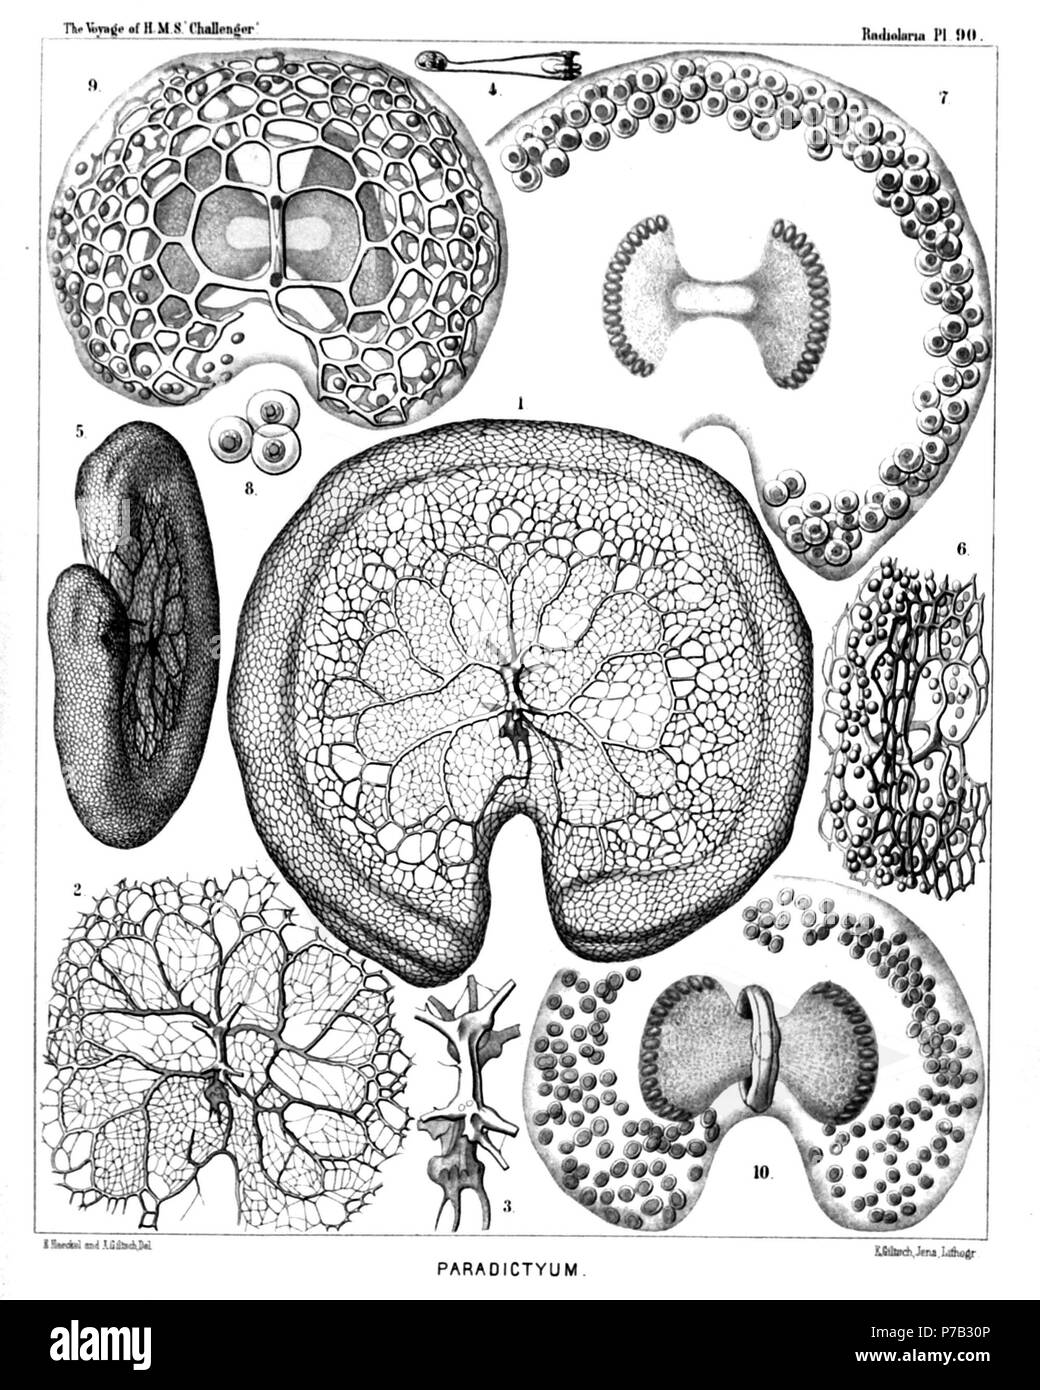 English: Illustration from Report on the Radiolaria collected by H.M.S. Challenger during the years 1873-1876. Part III. Original description follows:  Plate 90. Androspyrida.  Diam.  Fig. 1. Nephrospyris paradictyum, n. sp. (vel Paradictyum paradoxum), × 250  The complete shell, seen from the frontal side.  Fig. 2. Nephrospyris paradictyum, n. sp., × 250  The incomplete shell, seen from the dorsal side.  Fig. 3. Nephrospyris paradictyum, n. sp., × 500  The sagittal ring, isolated, from the dorsal side; more enlarged.  Fig. 4. Nephrospyris paradictyum, n. sp., × 120  Vertical section through h Stock Photo